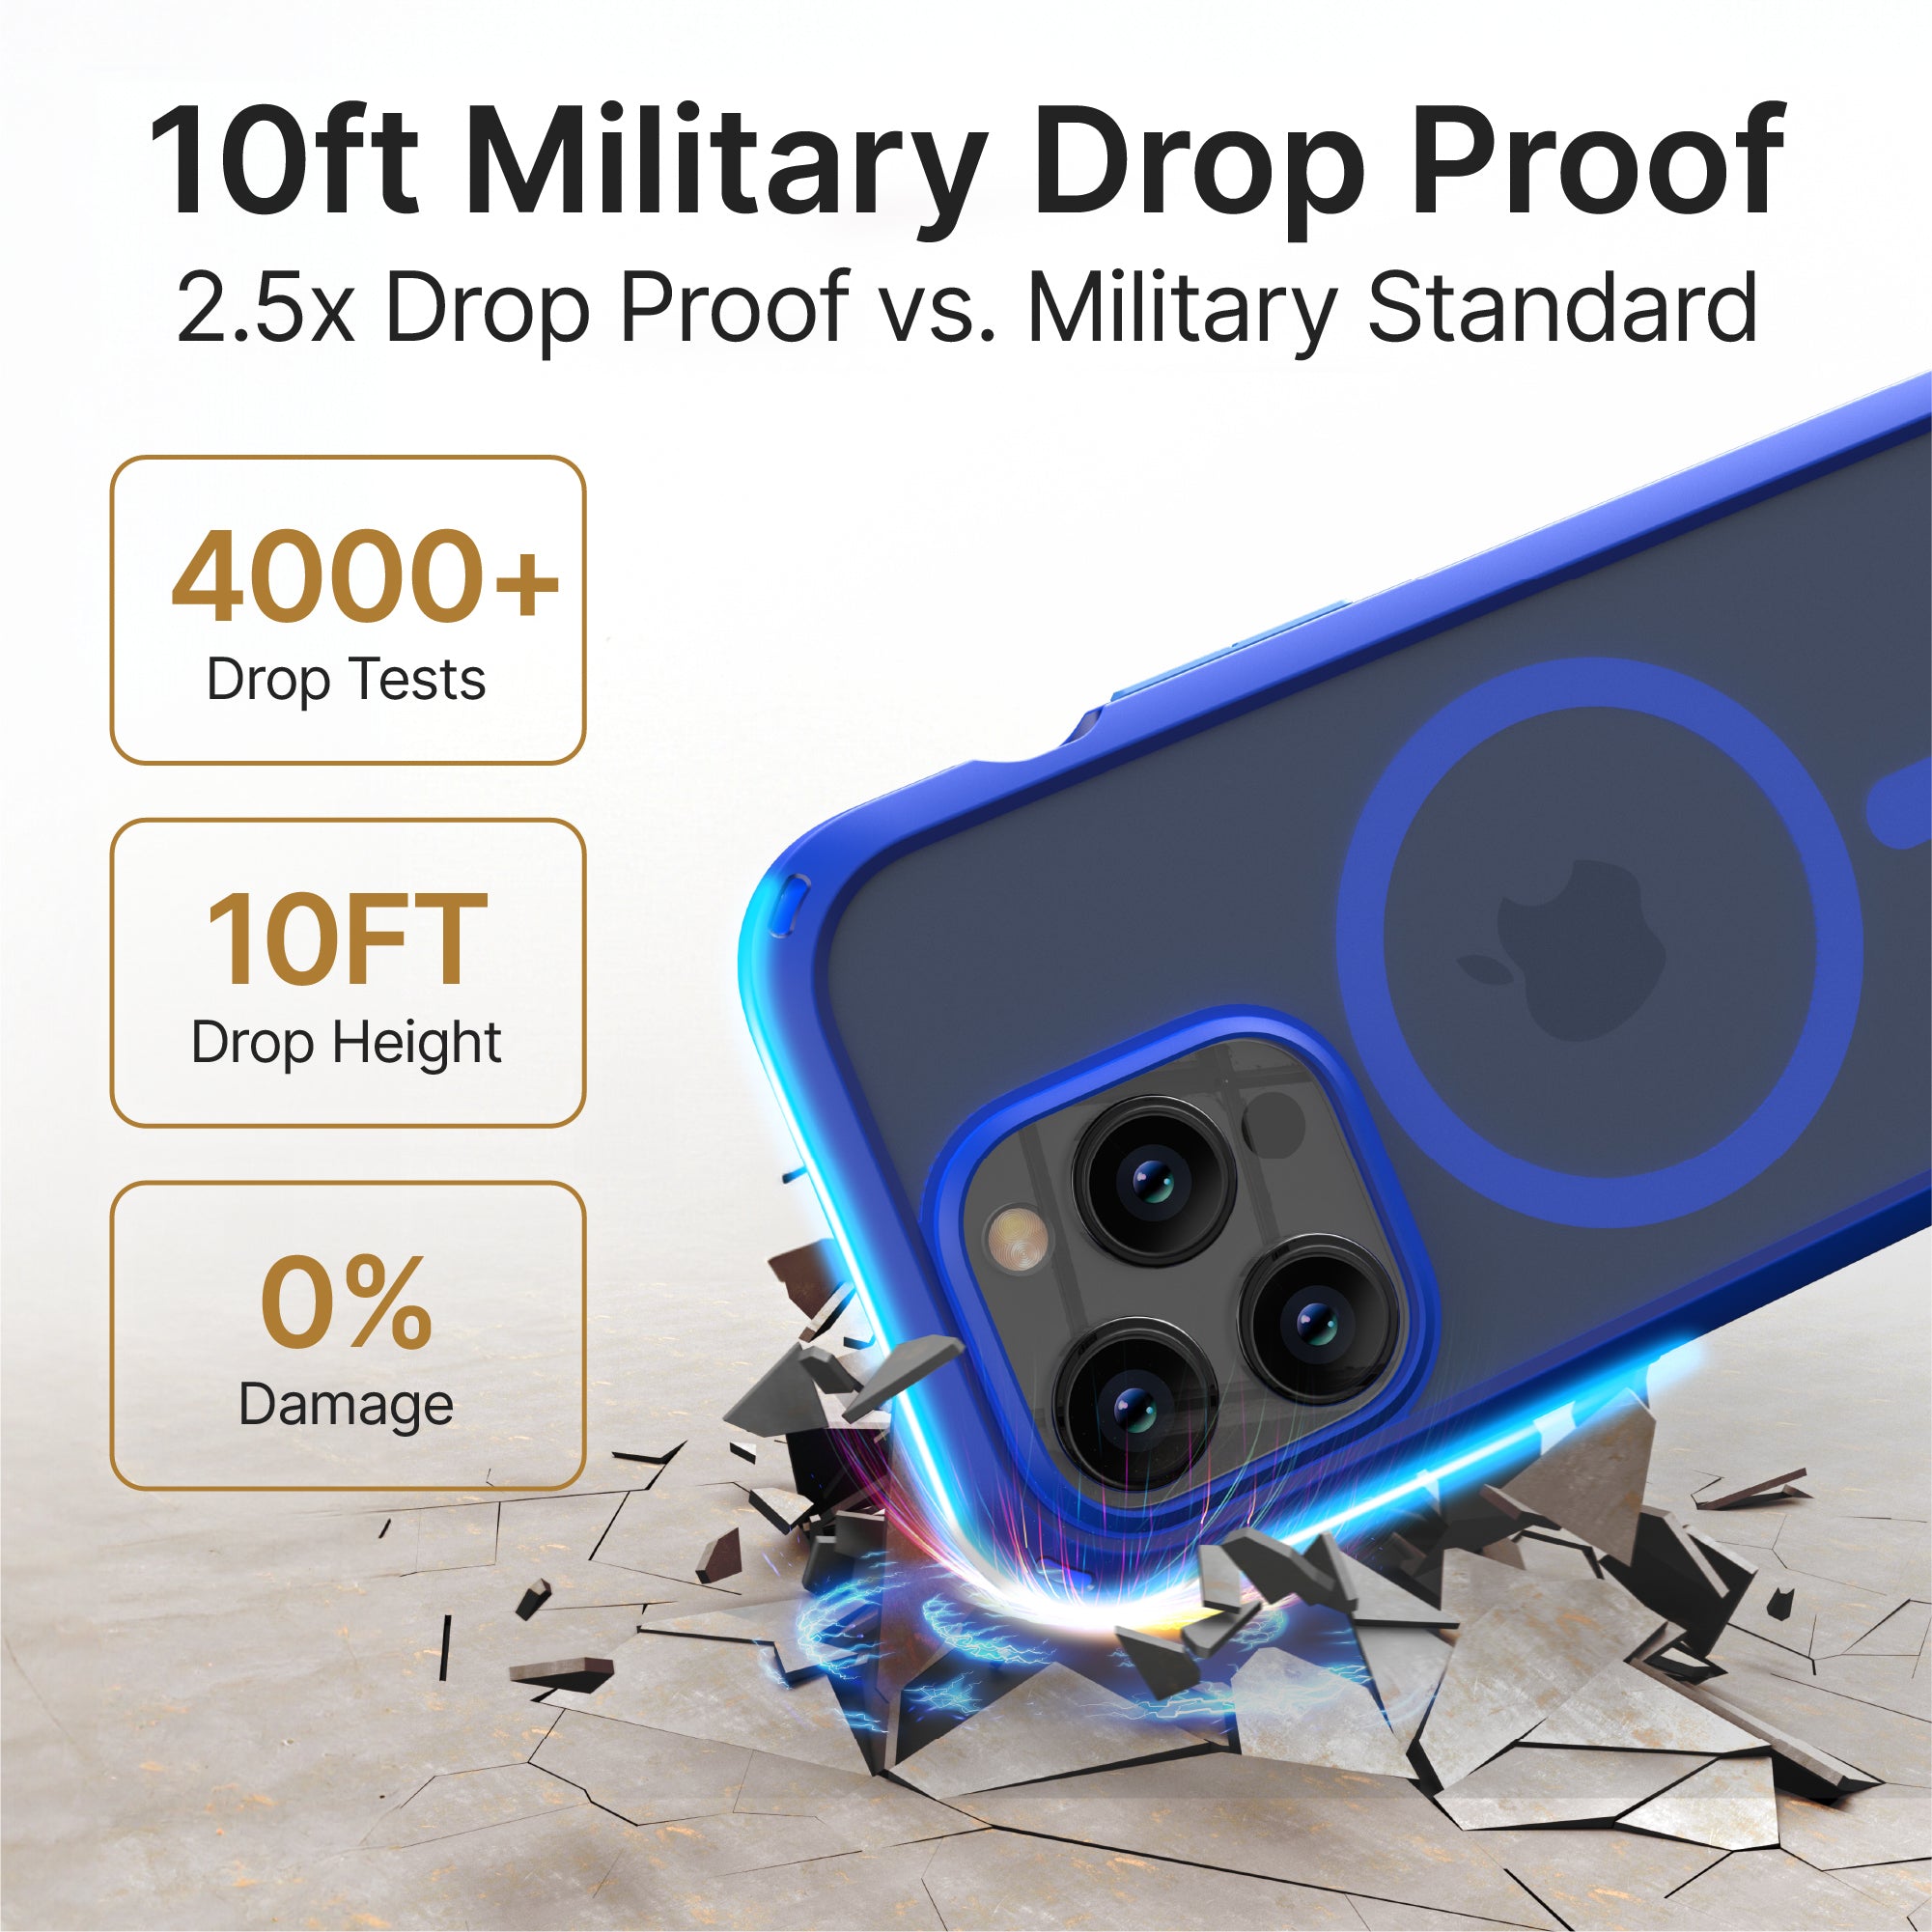 catalyst iphone 15 series influence case magsafe compatible atlantic blue for iphone 15 pro max with cracked floor text reads 10ft military drop proof 2.5x drop proof vs military standard 4000+ drop tests 10ft drop height 0% damage